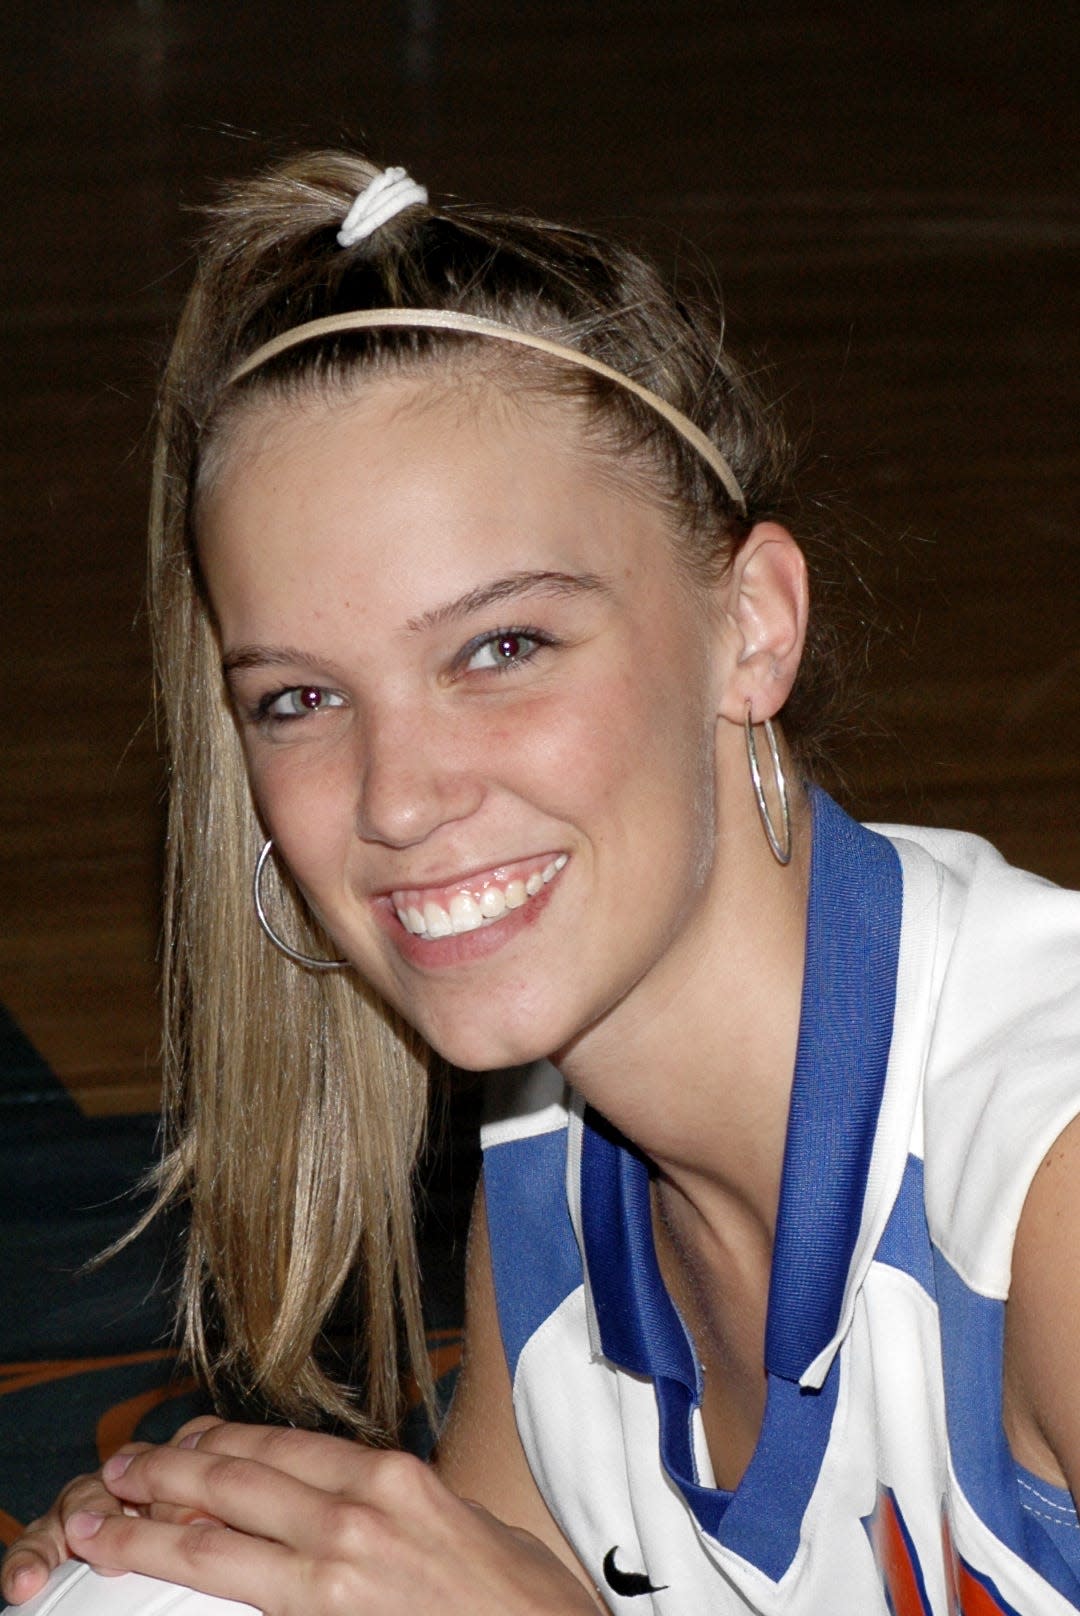 Morgan Engelbert as a member of the Thomas A. Edison volleyball team in 2006.